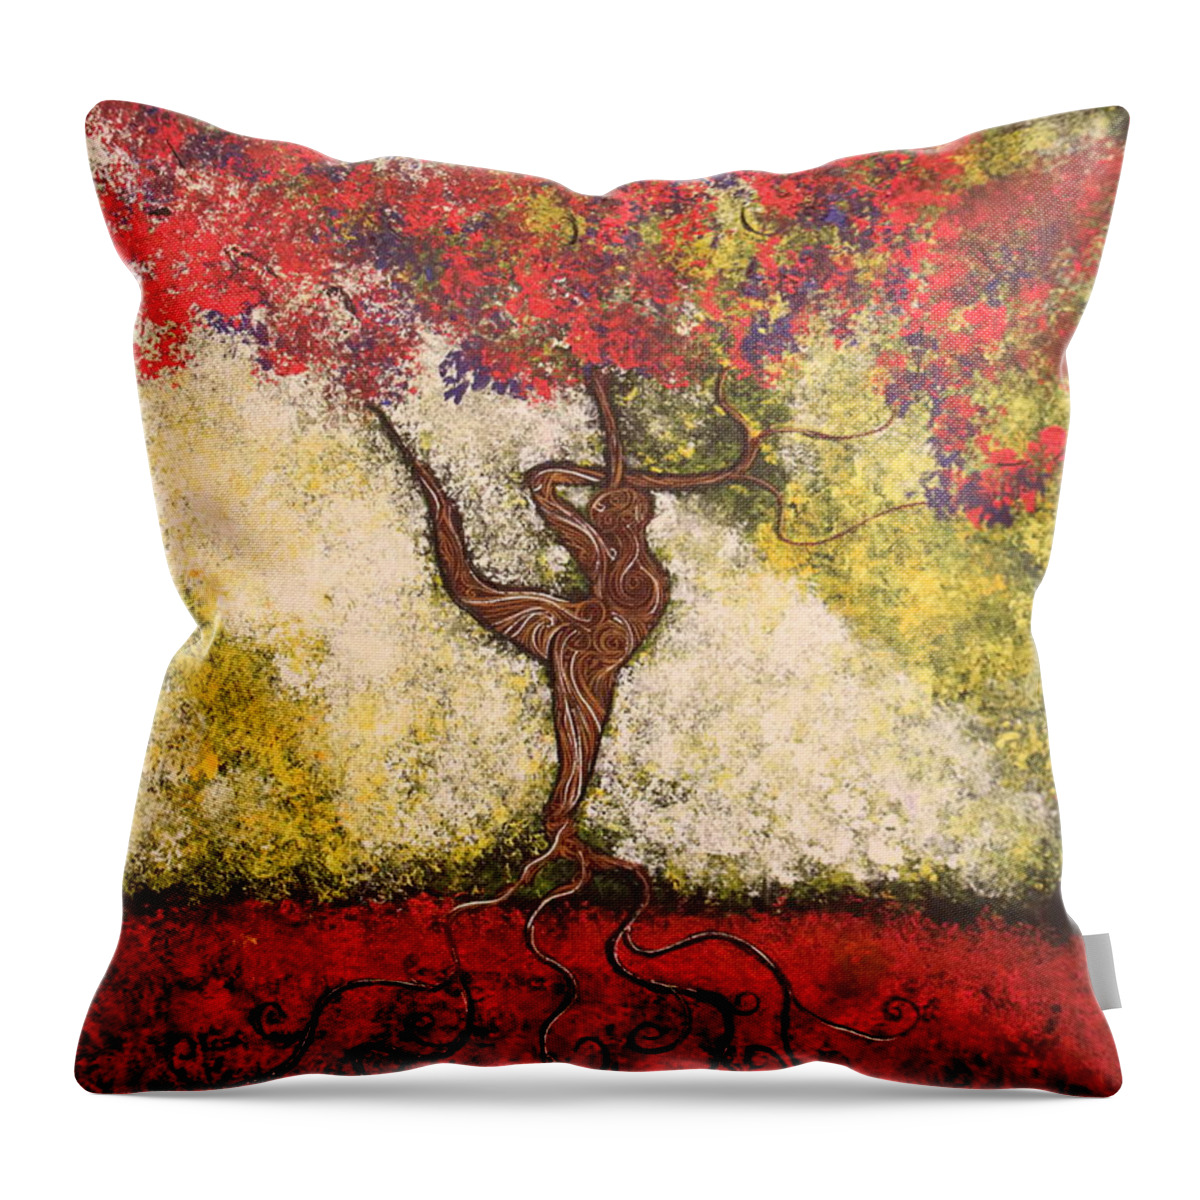 Impressionism Throw Pillow featuring the painting The Dancer Series 7 by Stefan Duncan